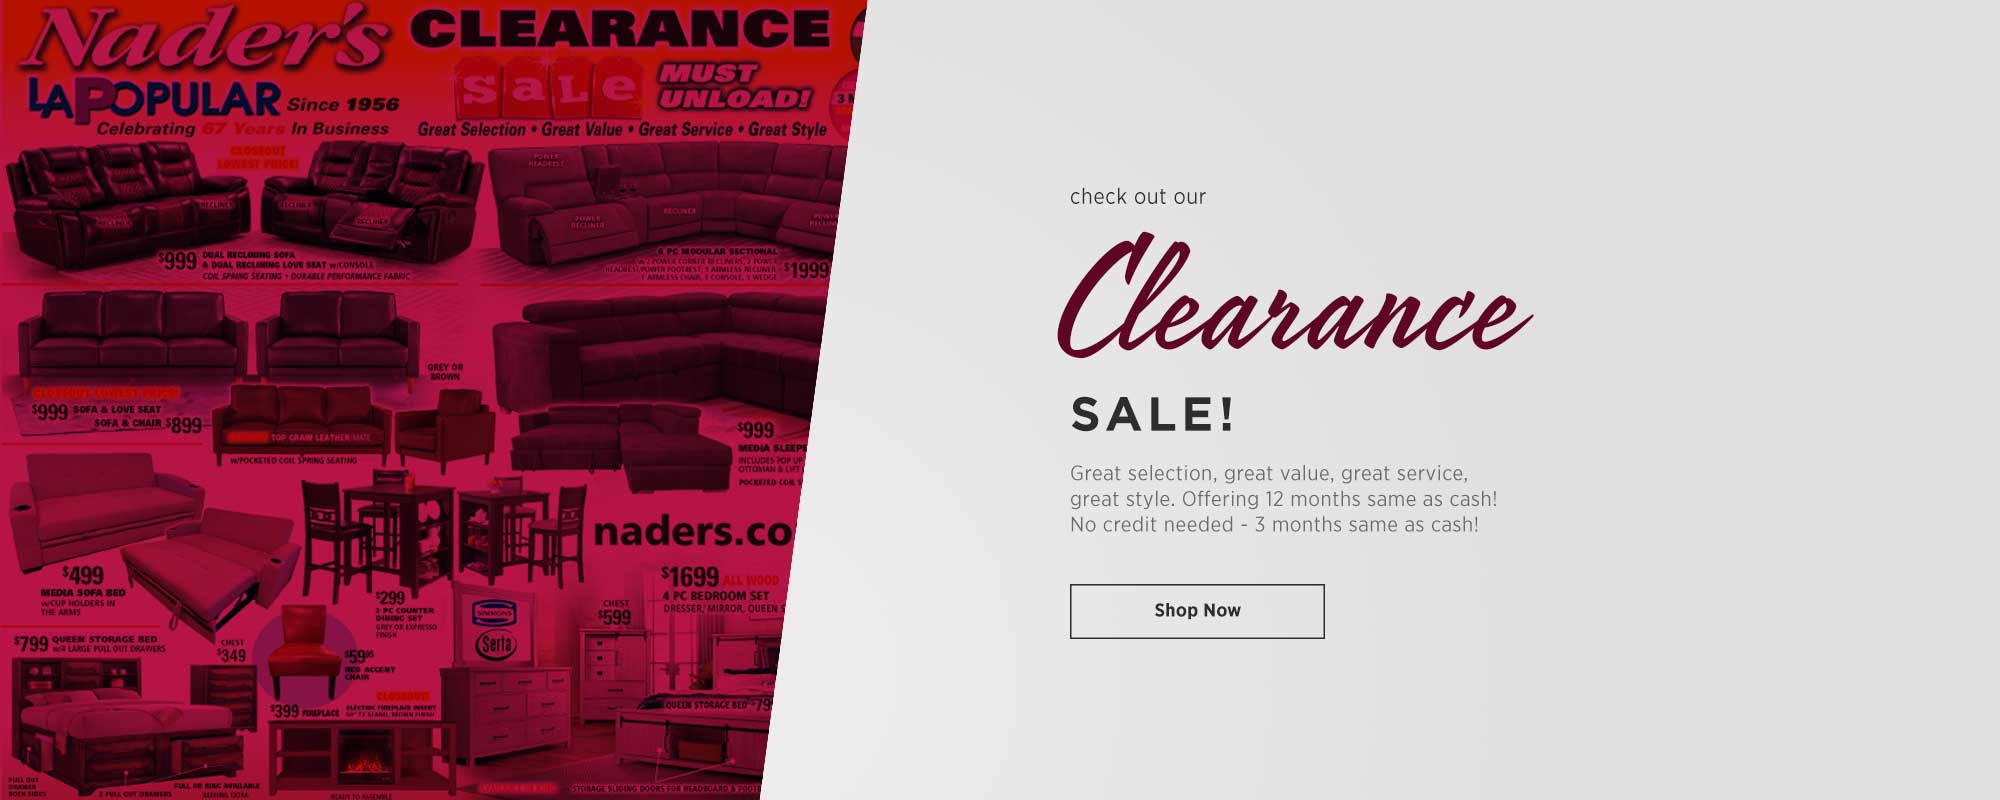 Check out our Clearance Sale - Shop Now